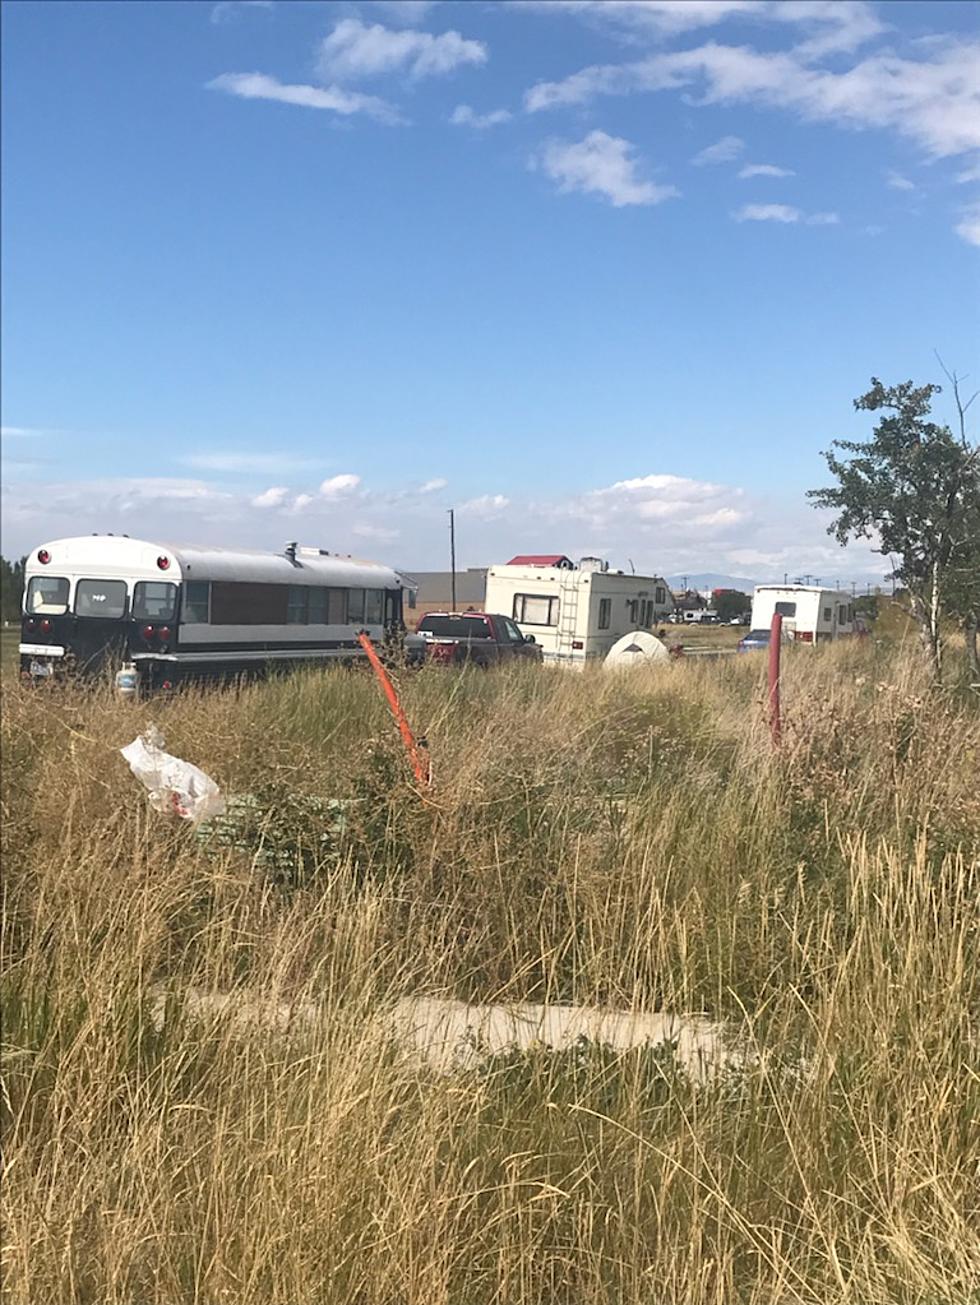 Fastest Growing Neighborhoods in Bozeman? Campers, RVs, and Tents